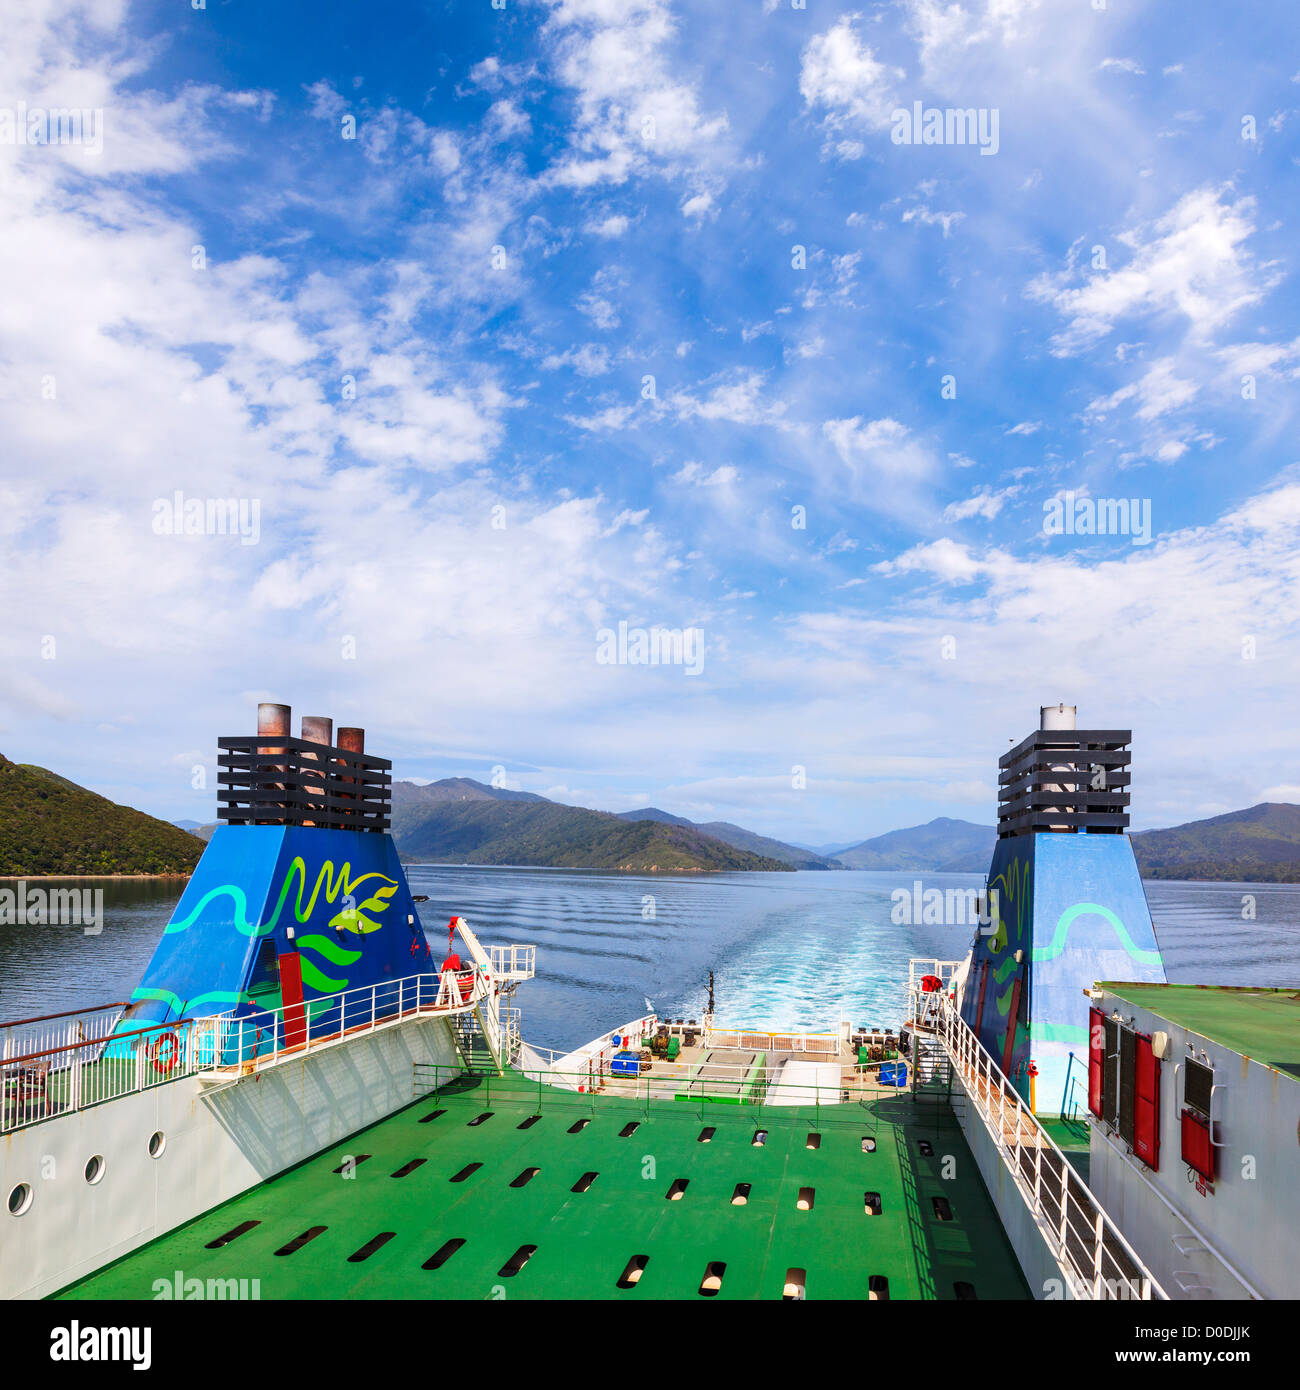 A view from the Interislander ferry Aratere as it sails out through the Marlborough Sounds, New Zealand. Stock Photo